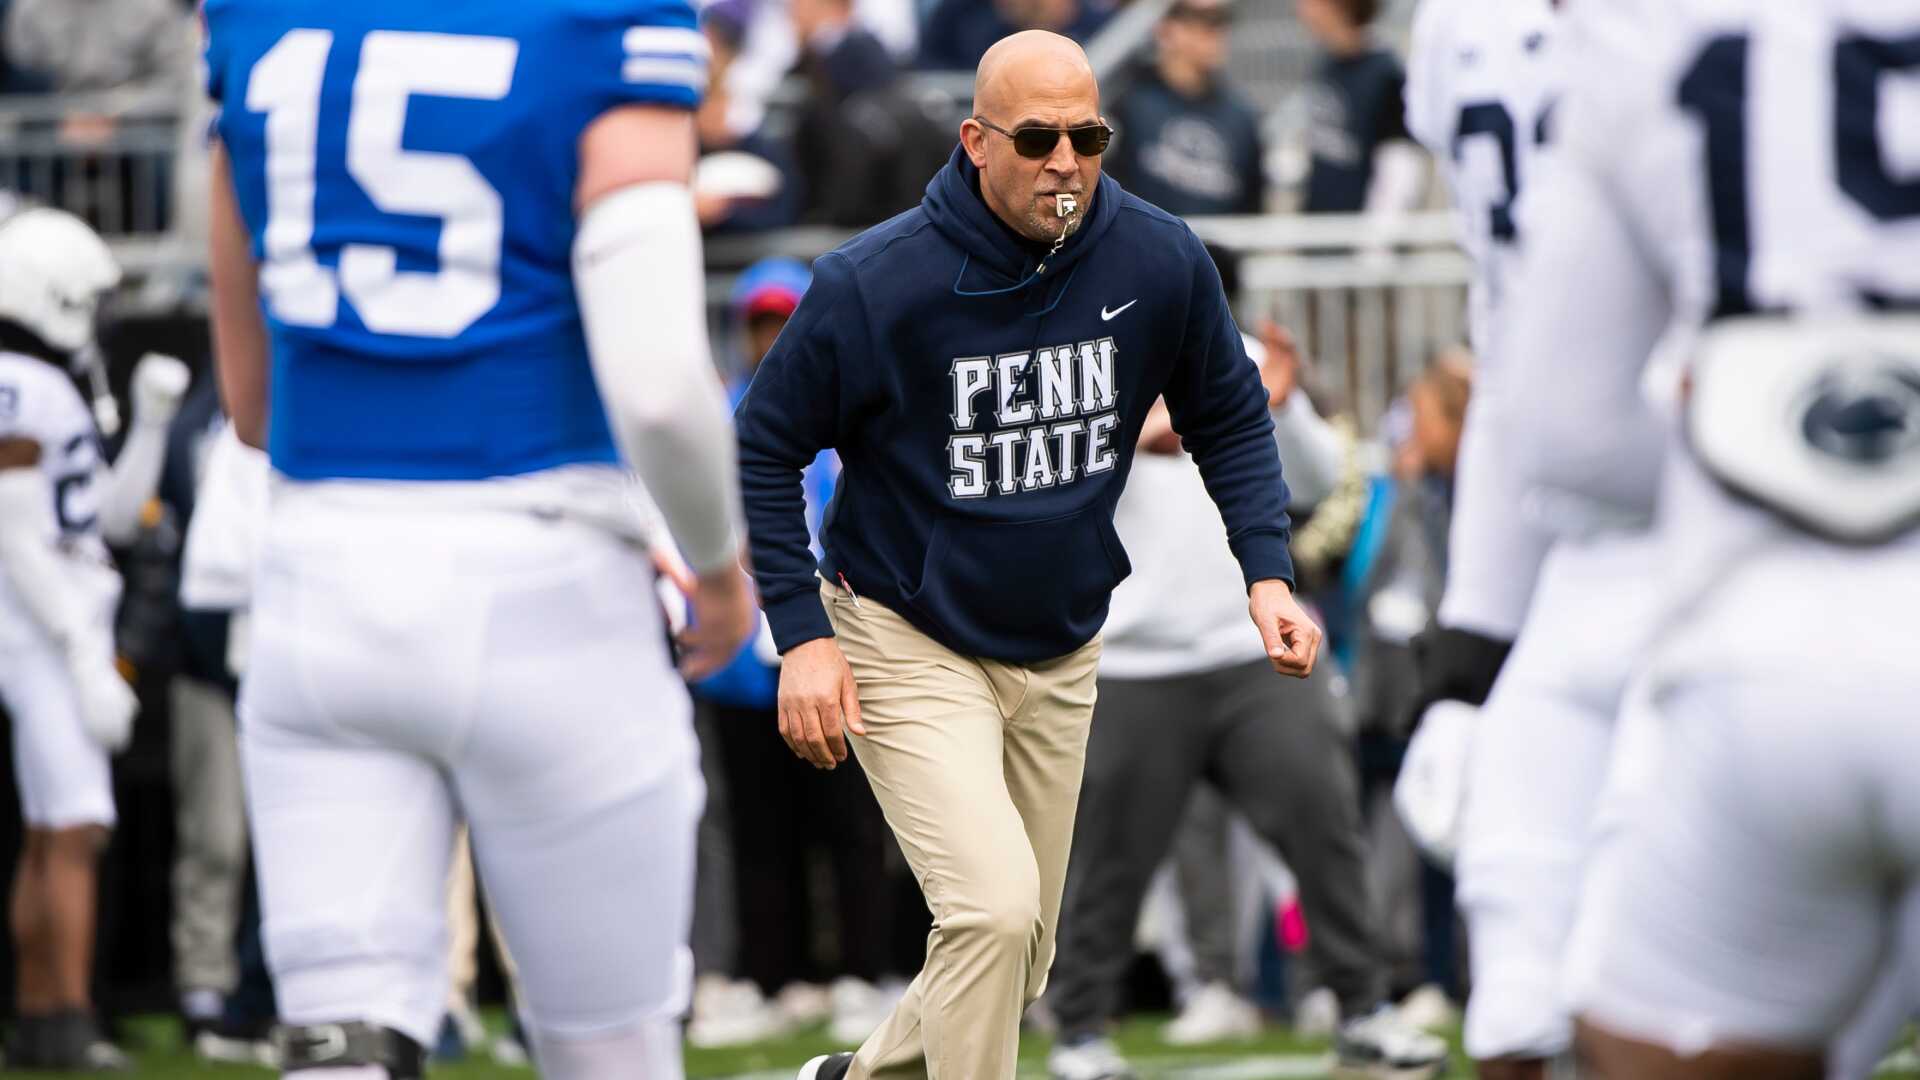 Penn State found ‘friction’ between coach James Franklin, team doctor; could not determine violation